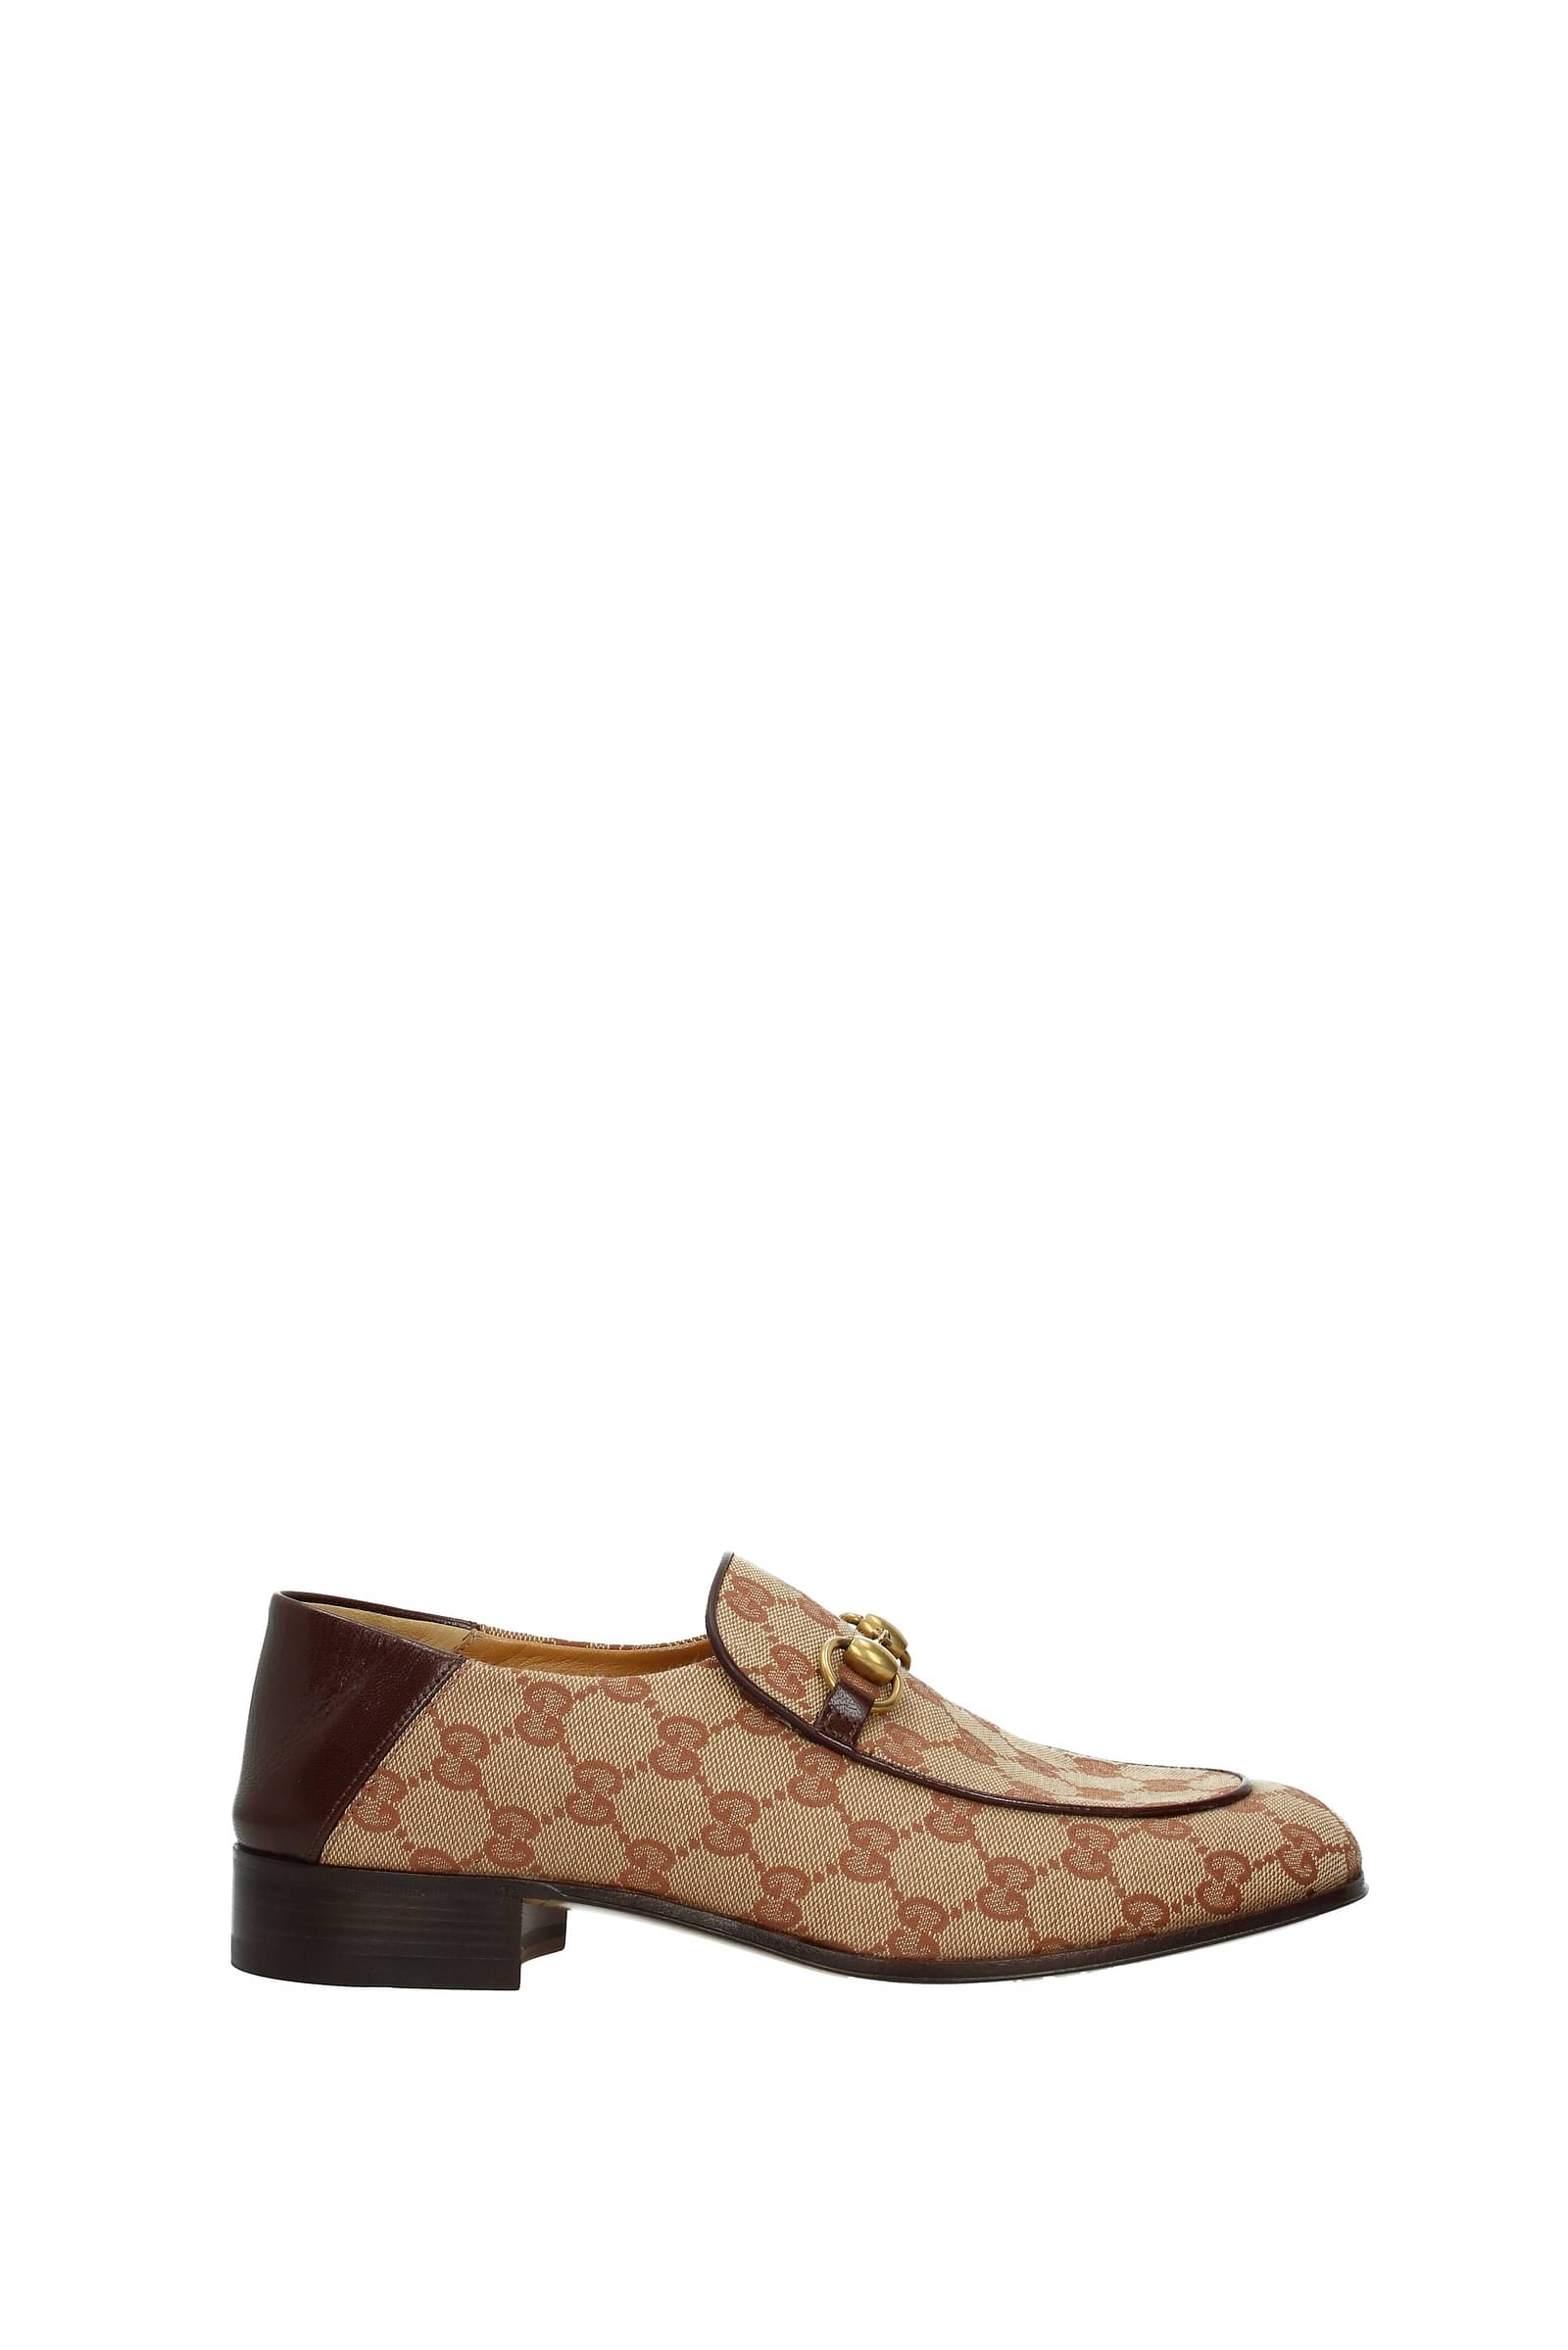 gucci loafers beige